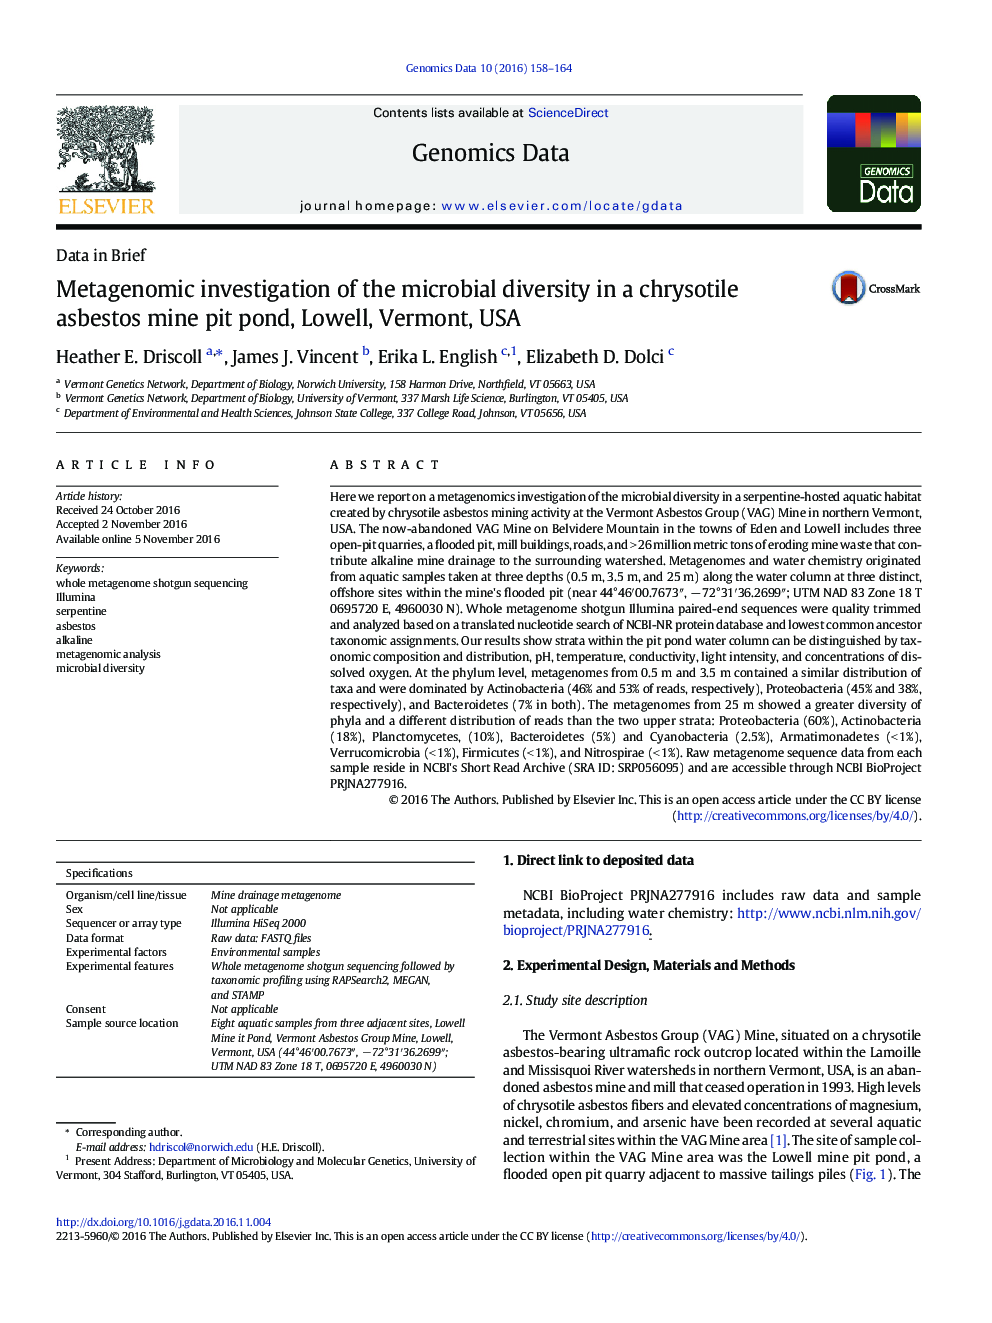 Metagenomic investigation of the microbial diversity in a chrysotile asbestos mine pit pond, Lowell, Vermont, USA